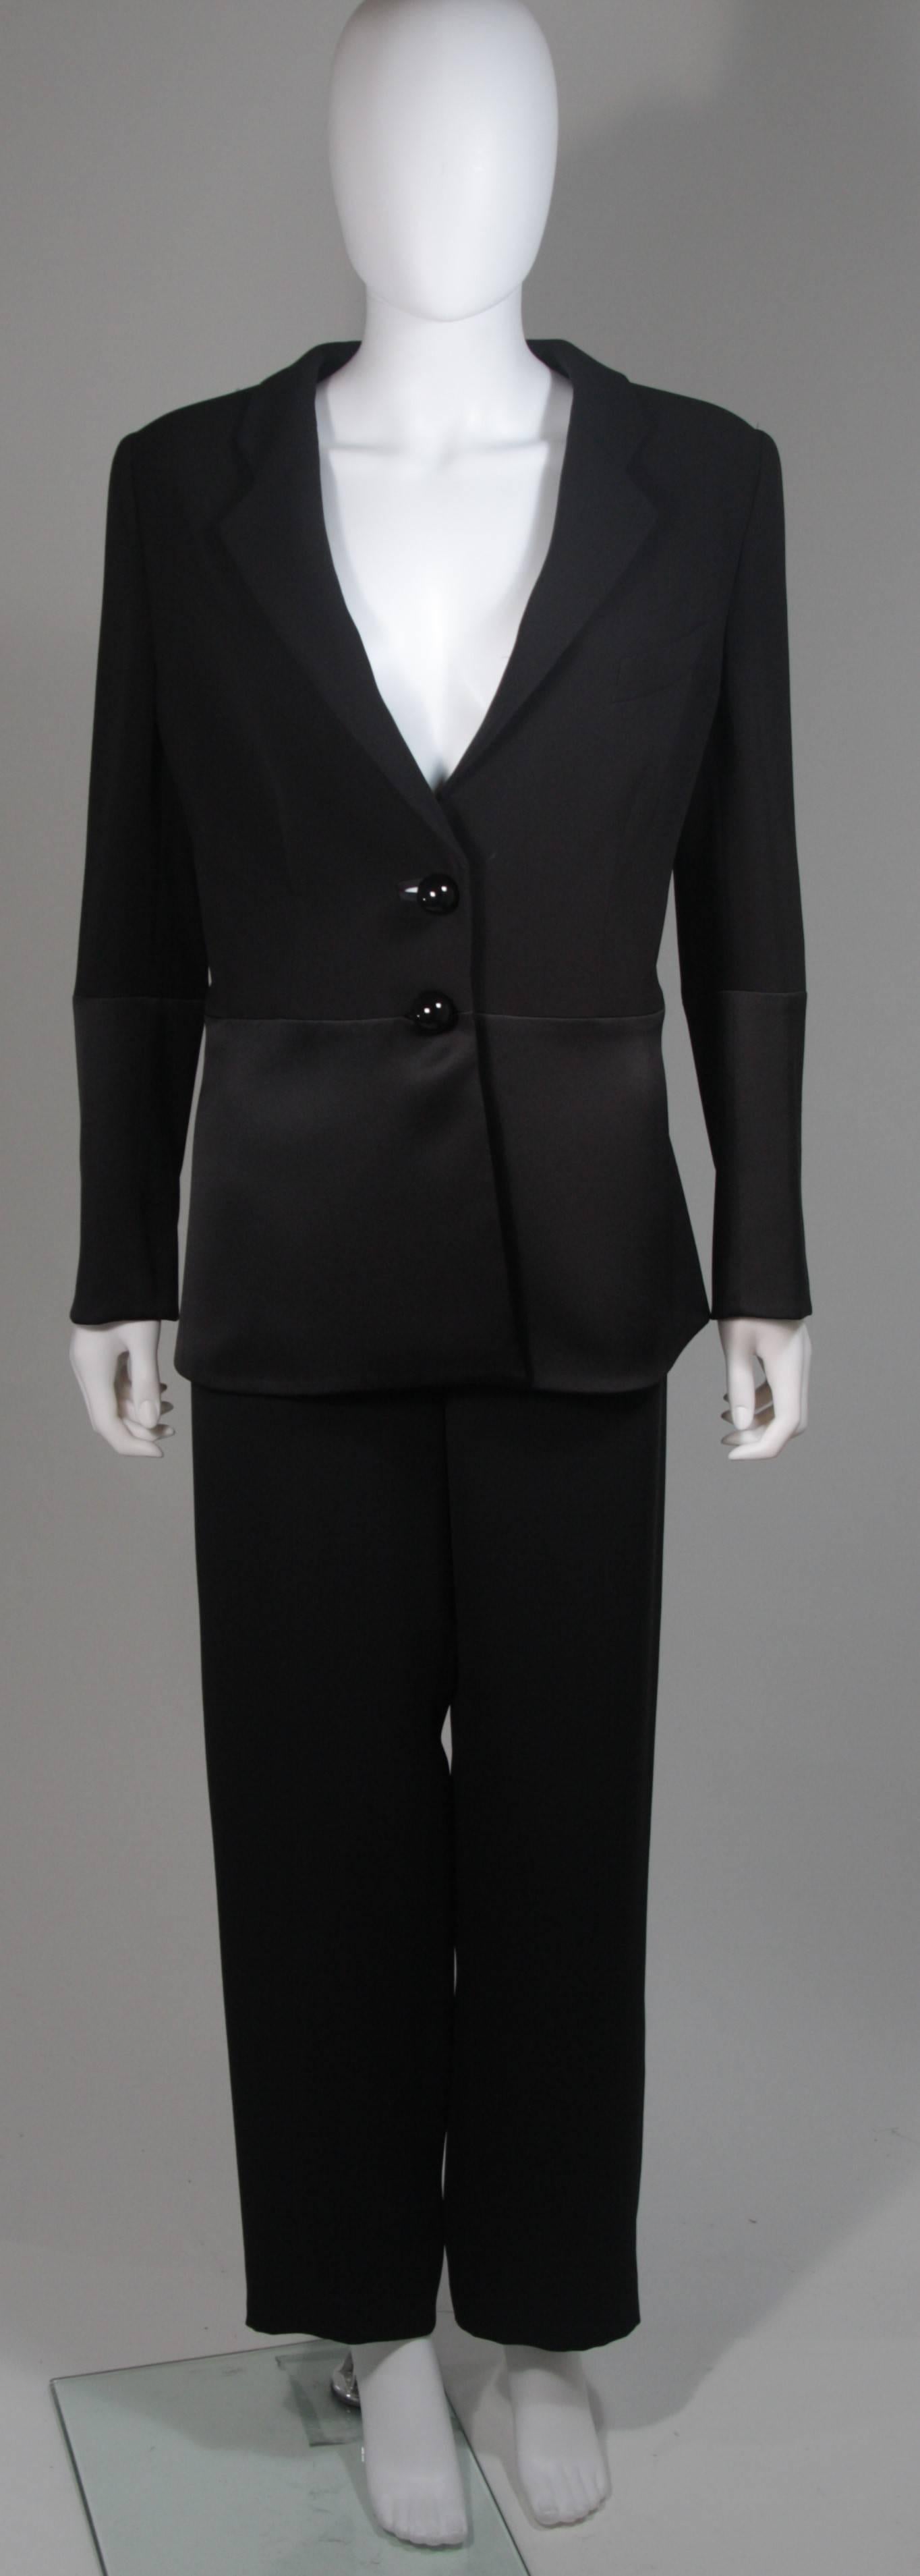 This Giorgio Armani pant suit is composed of a black silk. The jacket features large black buttons and a contrast silk satin detail at the waist. The pants have a side zip closure. In excellent condition. Made in Italy.

  **Please cross-reference